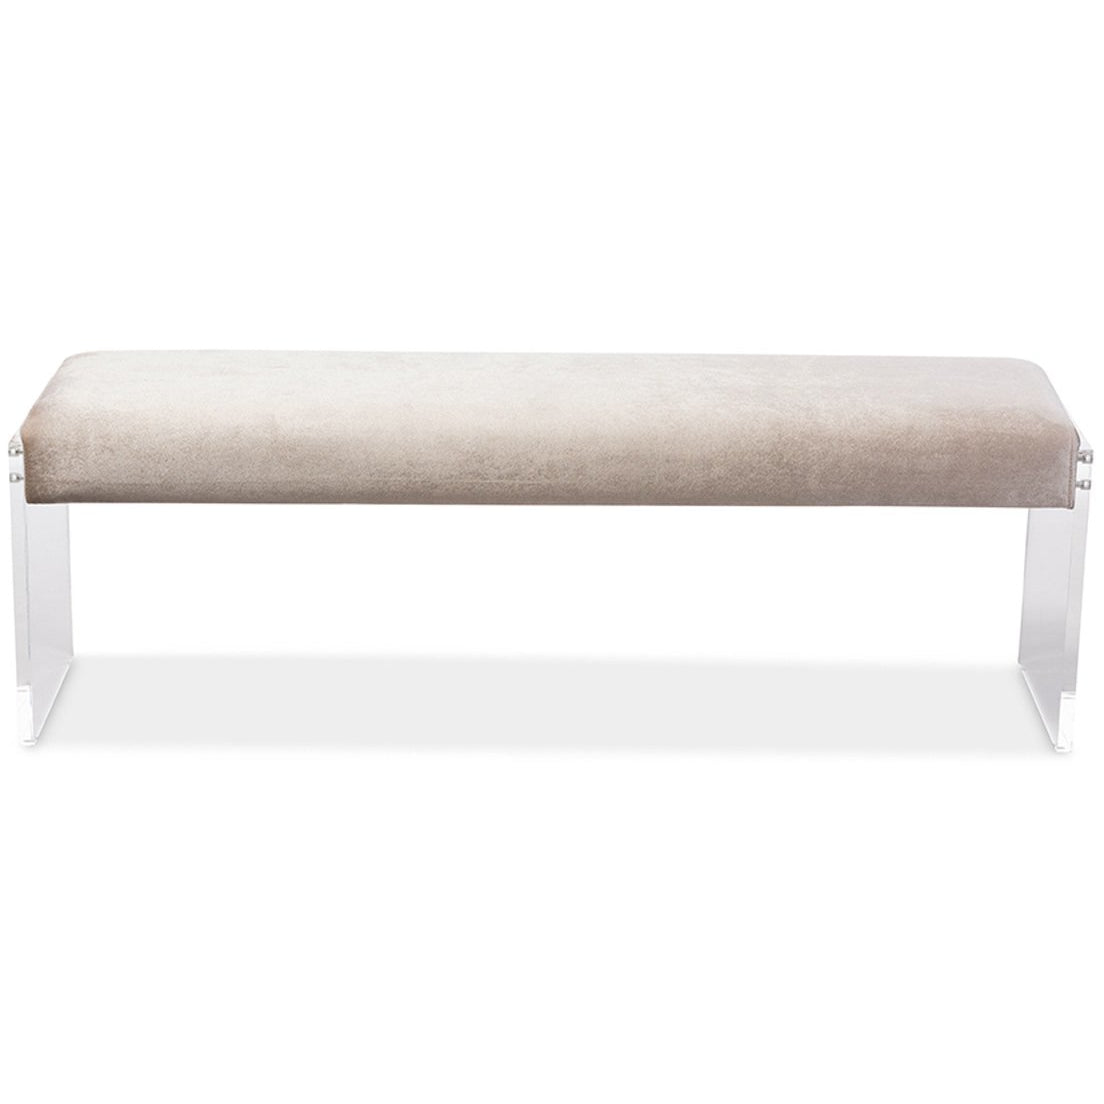 Baxton Studio Hildon Modern and Contemporary Beige Microsuede Fabric Upholstered Lux Bench with Paneled Acrylic Legs Baxton Studio-benches-Minimal And Modern - 1